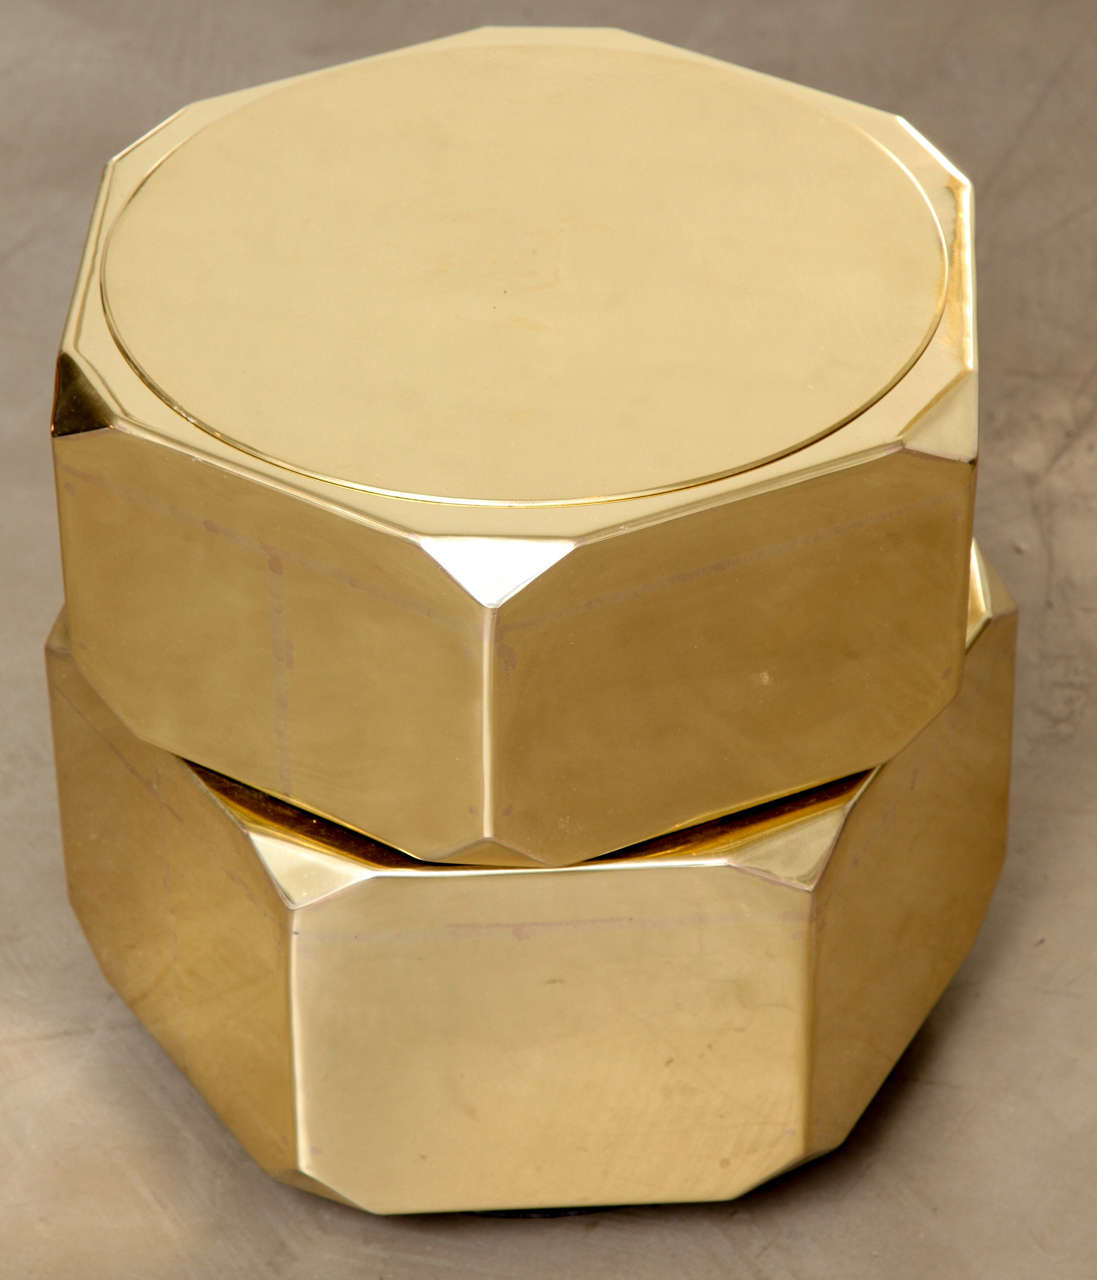 Brass (also available in stainless steel); Swivels on central axle.

Edition of 8 + 4AP
2013.

Maurice Marty's skills cover the gamut of interior, surface and object works: he is a sculptor, a designer, an architect, a painter and interior